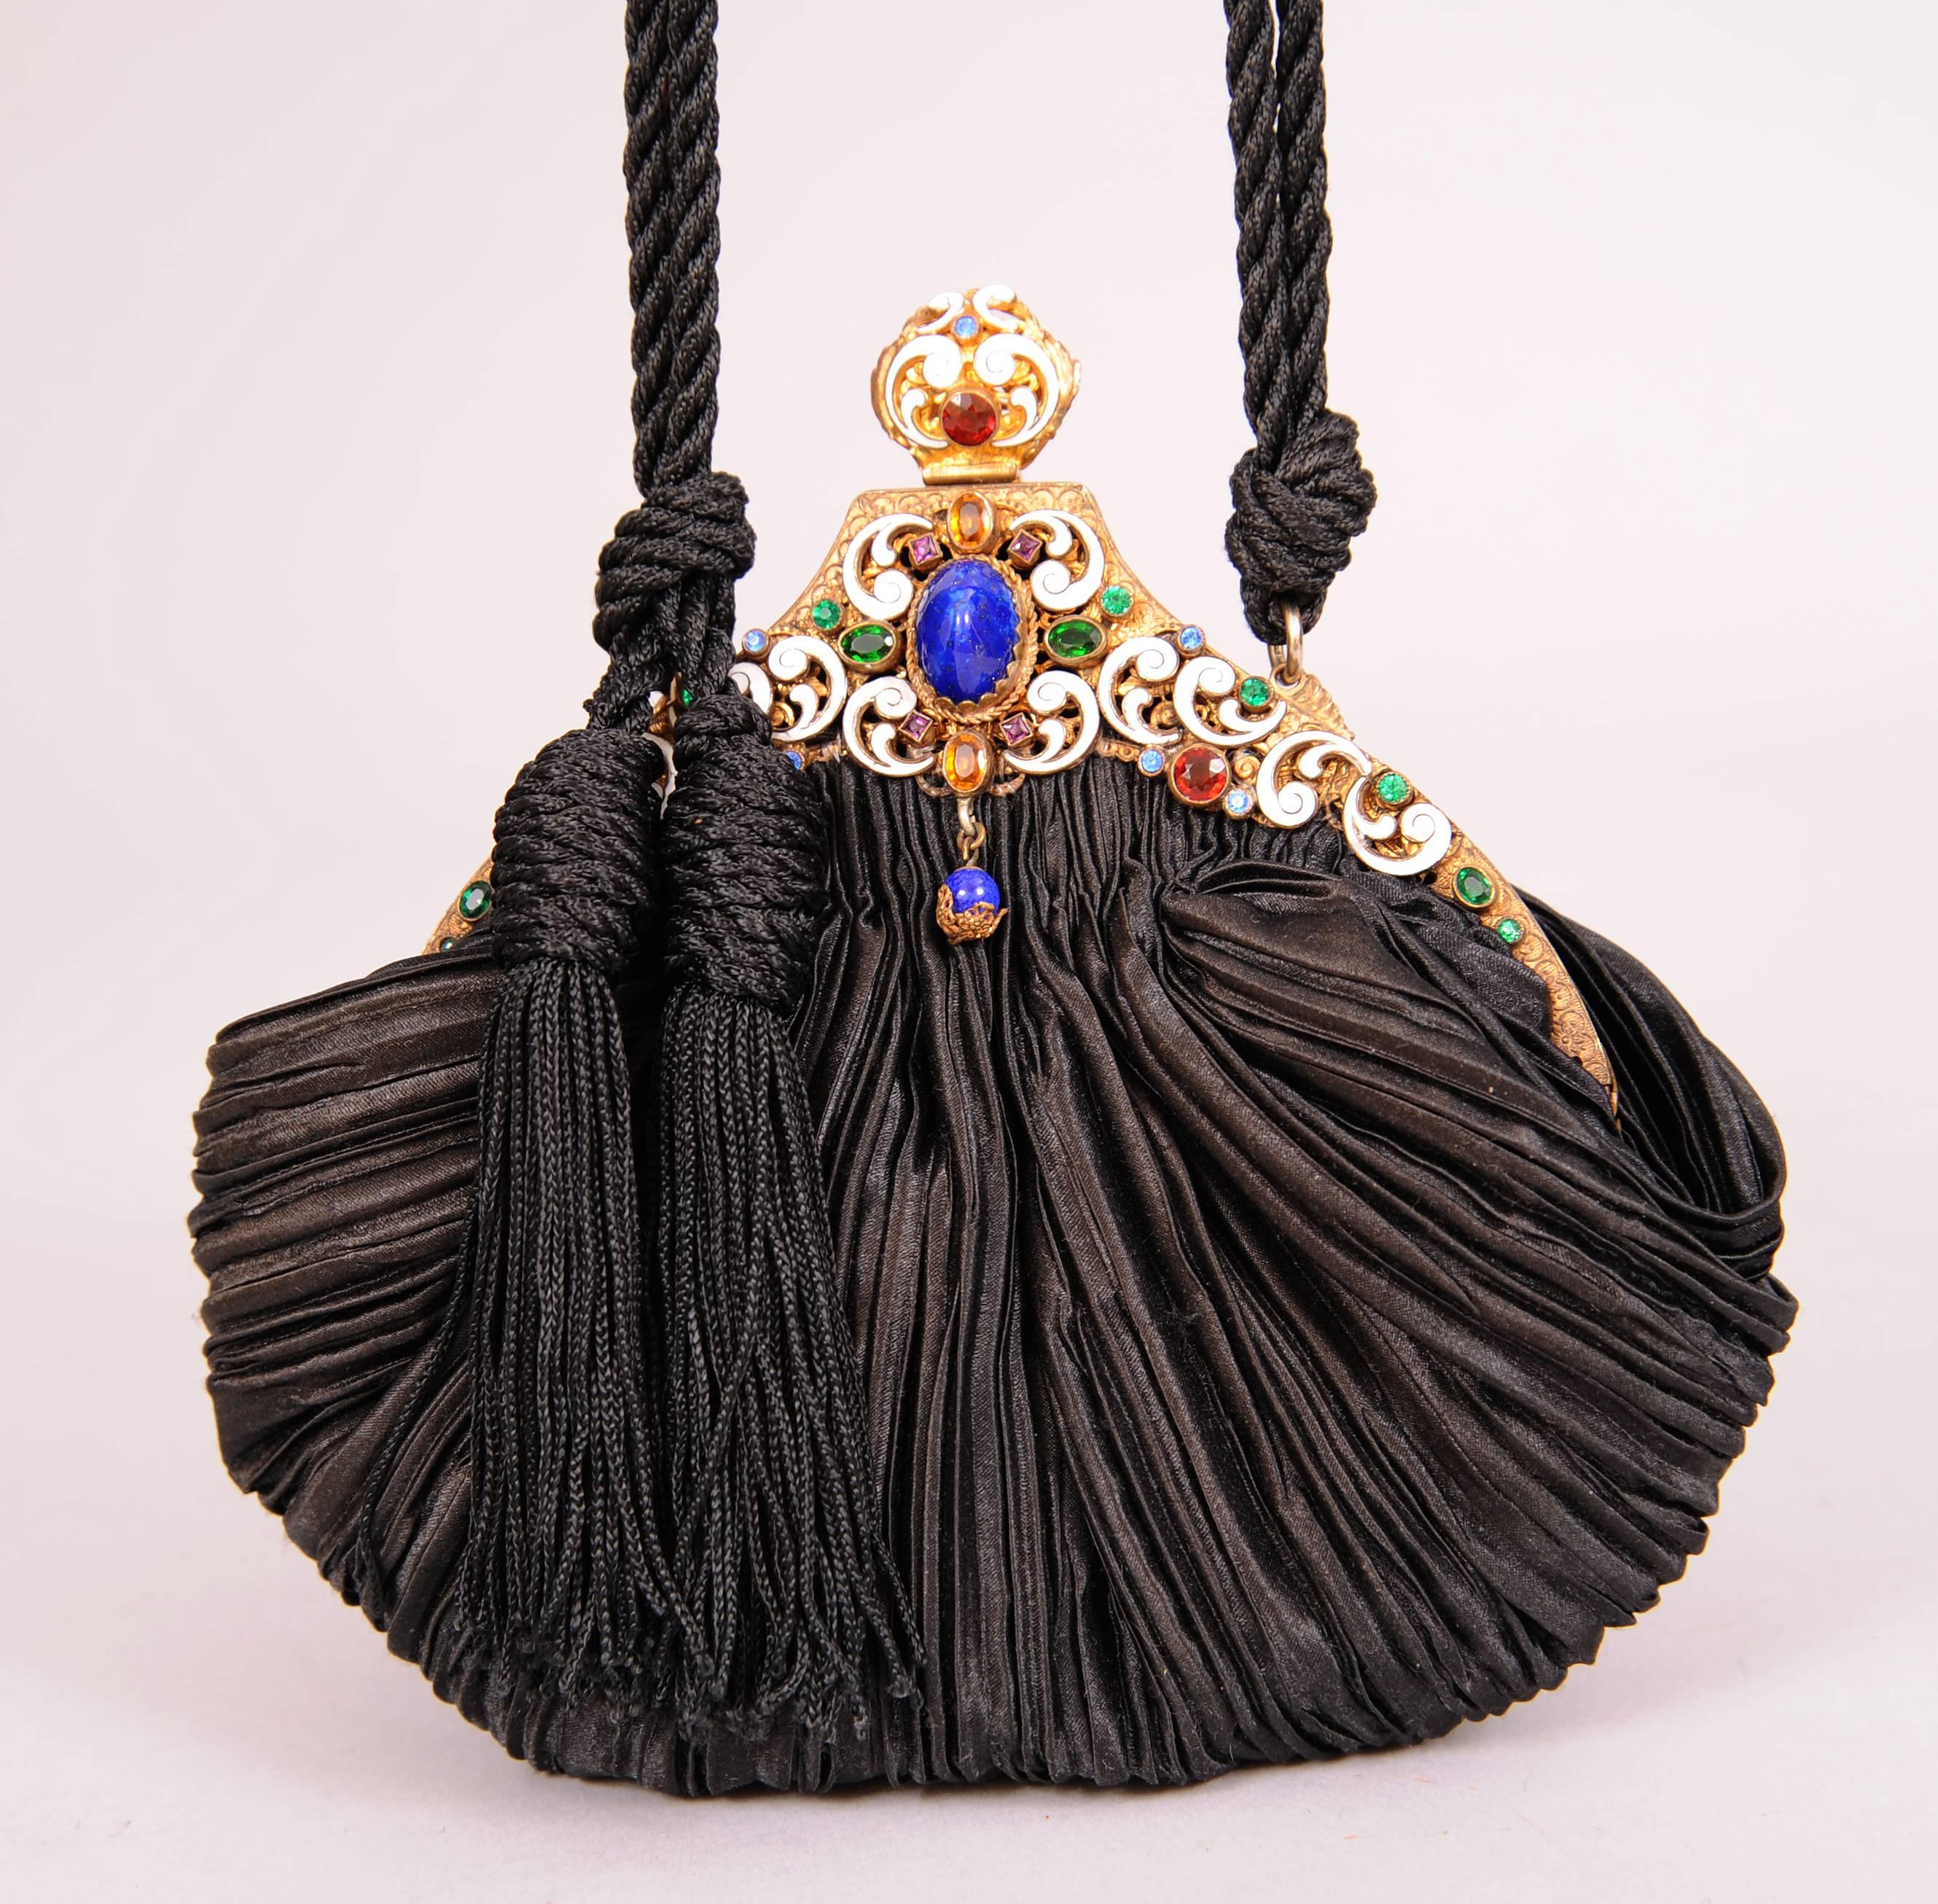 This elegant jewel frame dates to the 1930's and it is set with a large lapis stone at the center surrounded by a white enamel frame and multi color faceted stones. The body of the bag dates from the 1980's and it is black pleated silk. There is a